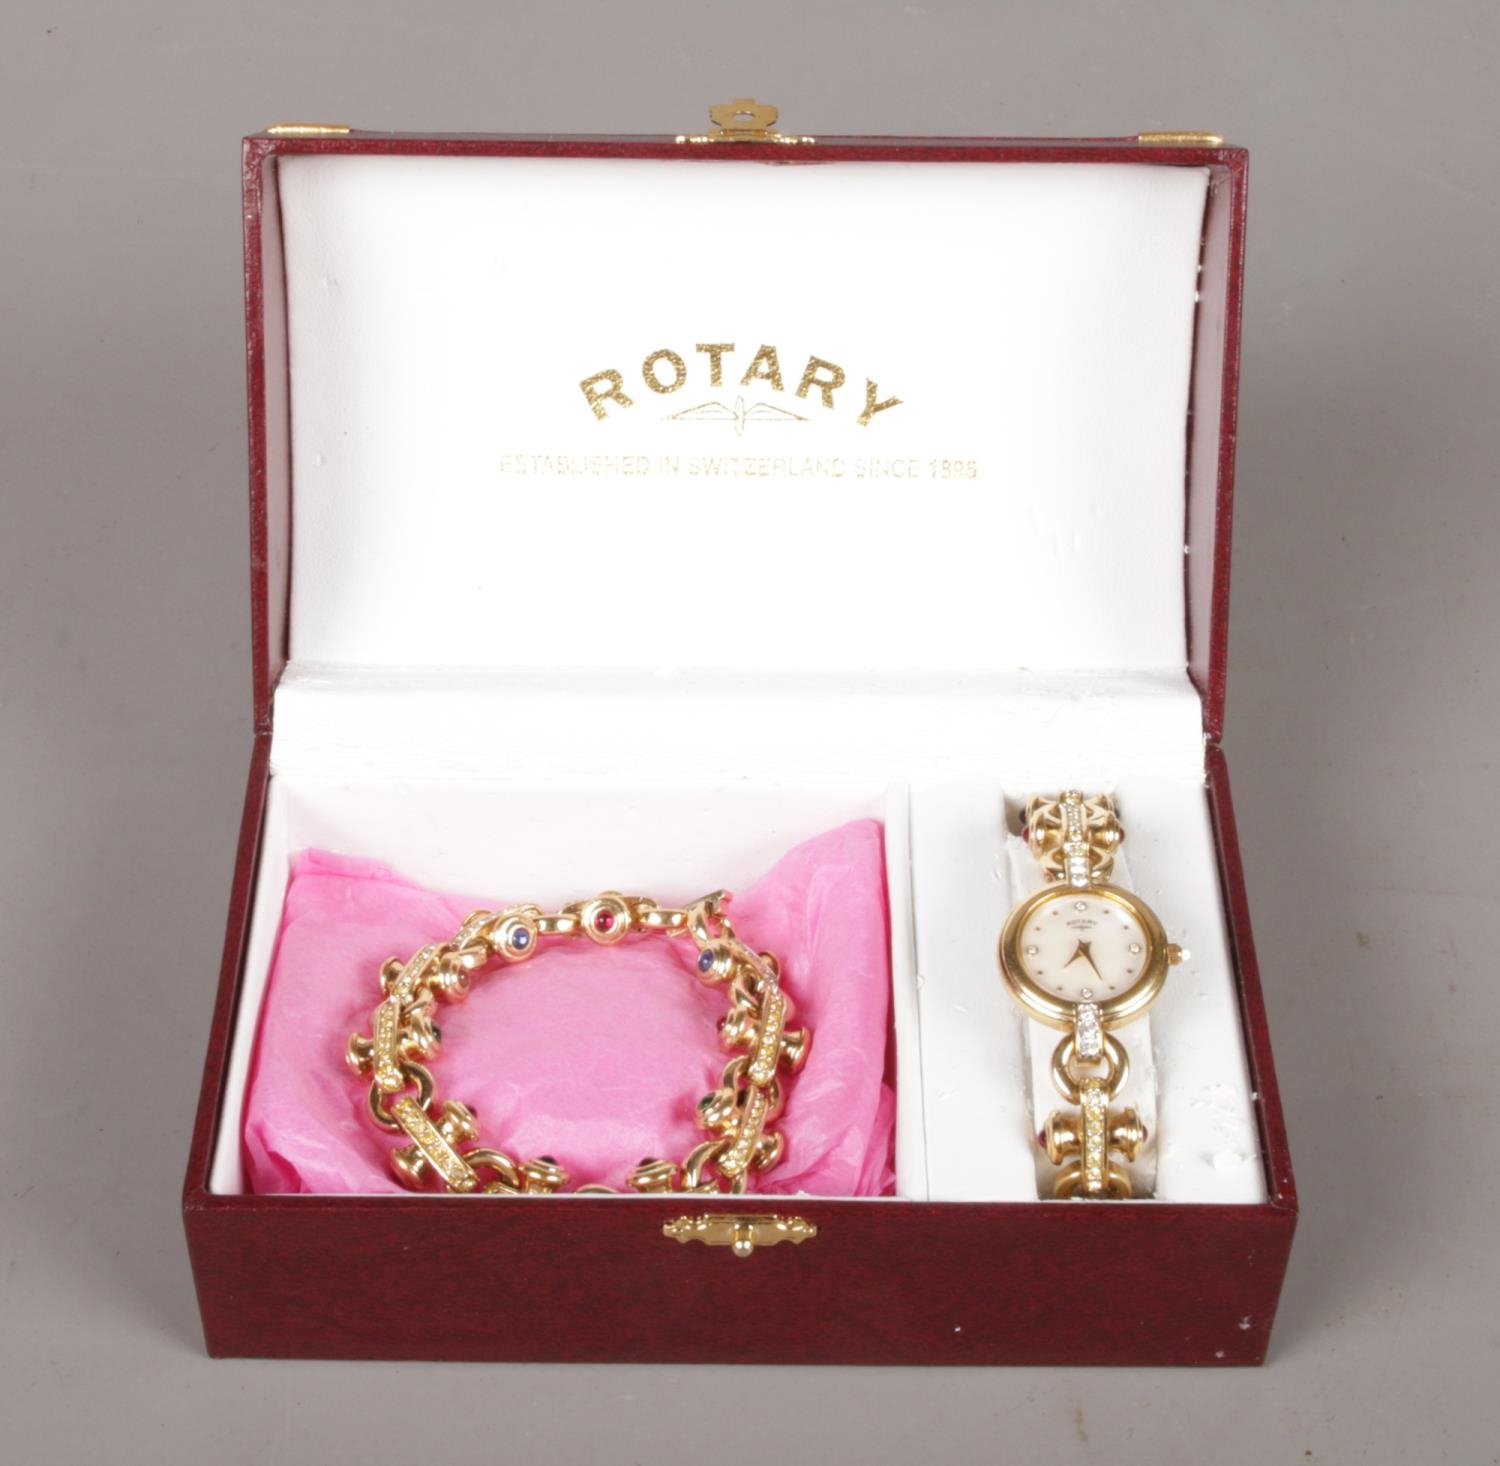 A boxed Rotary 'Monaco' ladies quartz wristwatch, with matching bracelet. Both examples set with